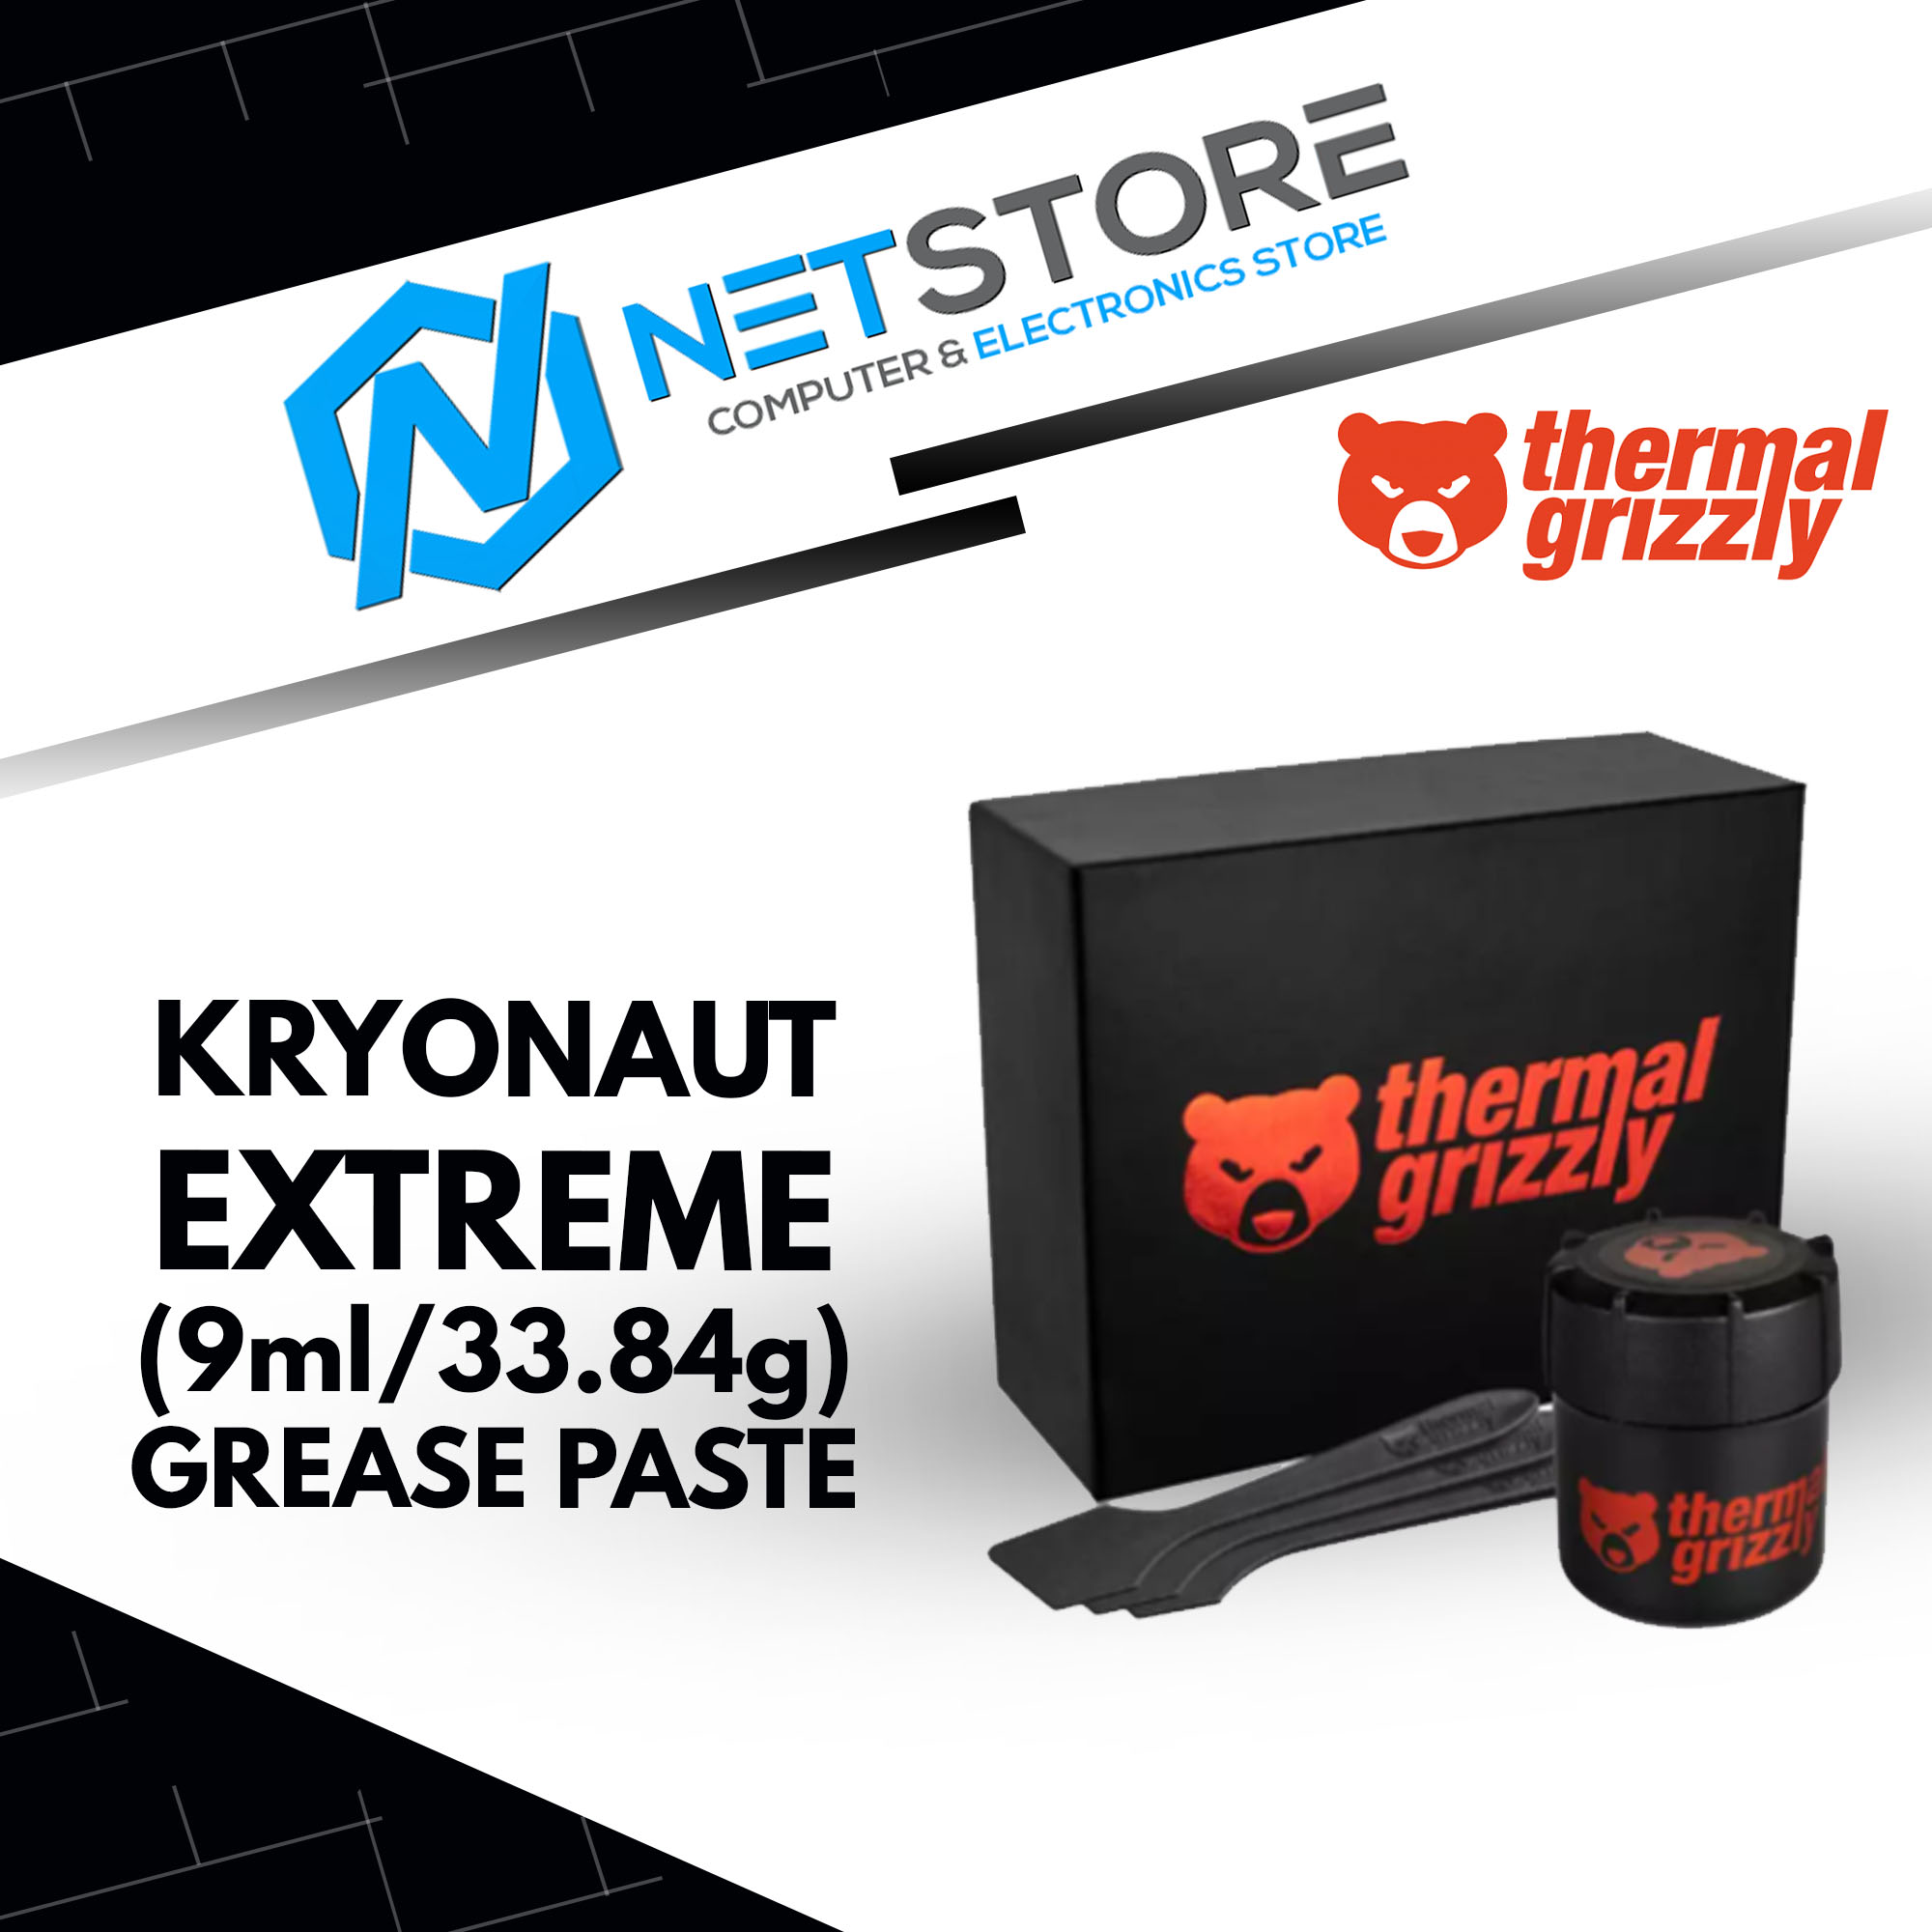 THERMAL GRIZZLY KRYONAUT EXTREME GREASE PASTE (9ml/33.84g)